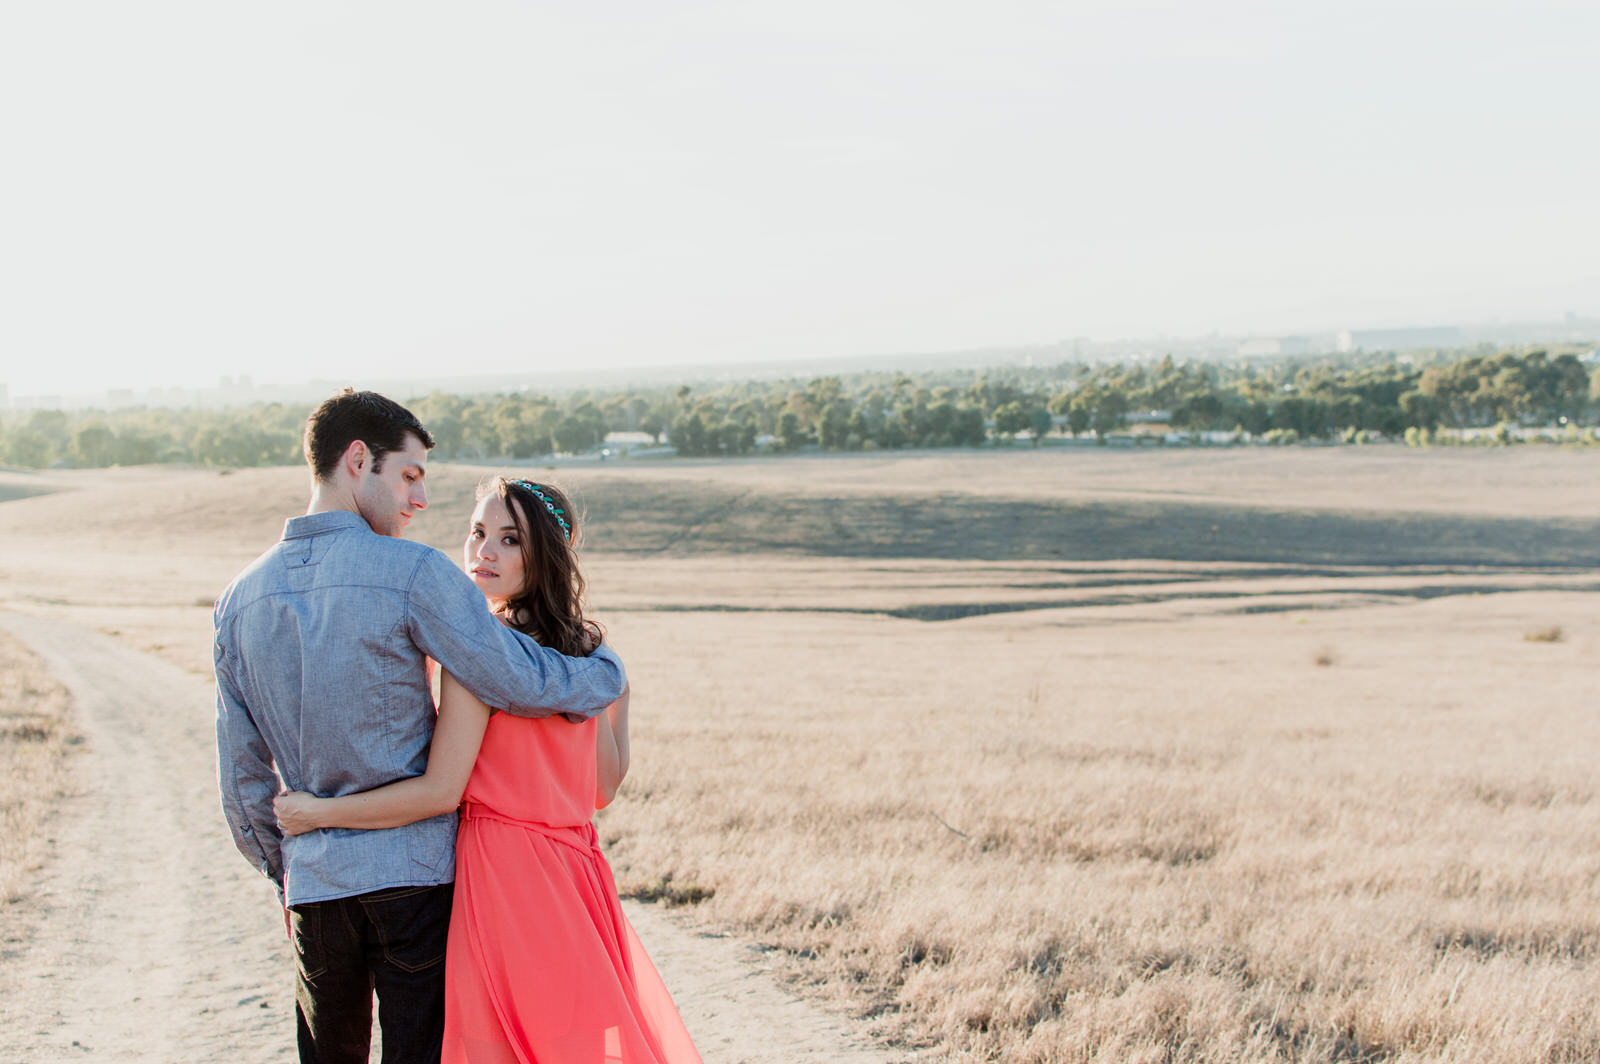 Becky & Steve - Quail Hill, Irvine engagement photo shoot by Jaclyn Le